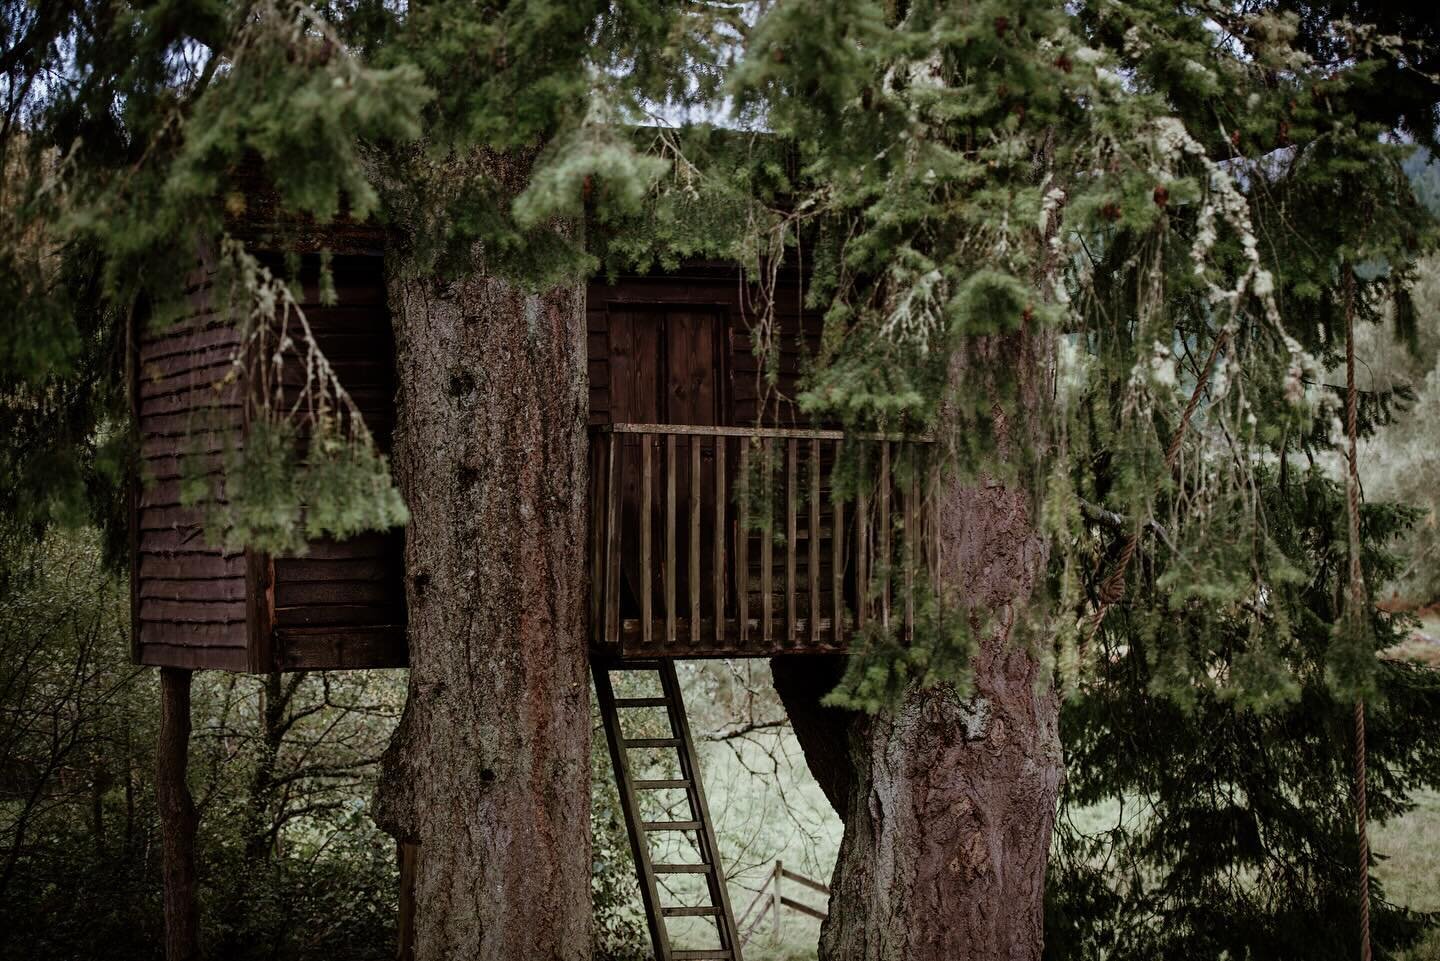 Nestled in the tall pines on our estate is the treehouse&hellip; fun for all imaginations ✨